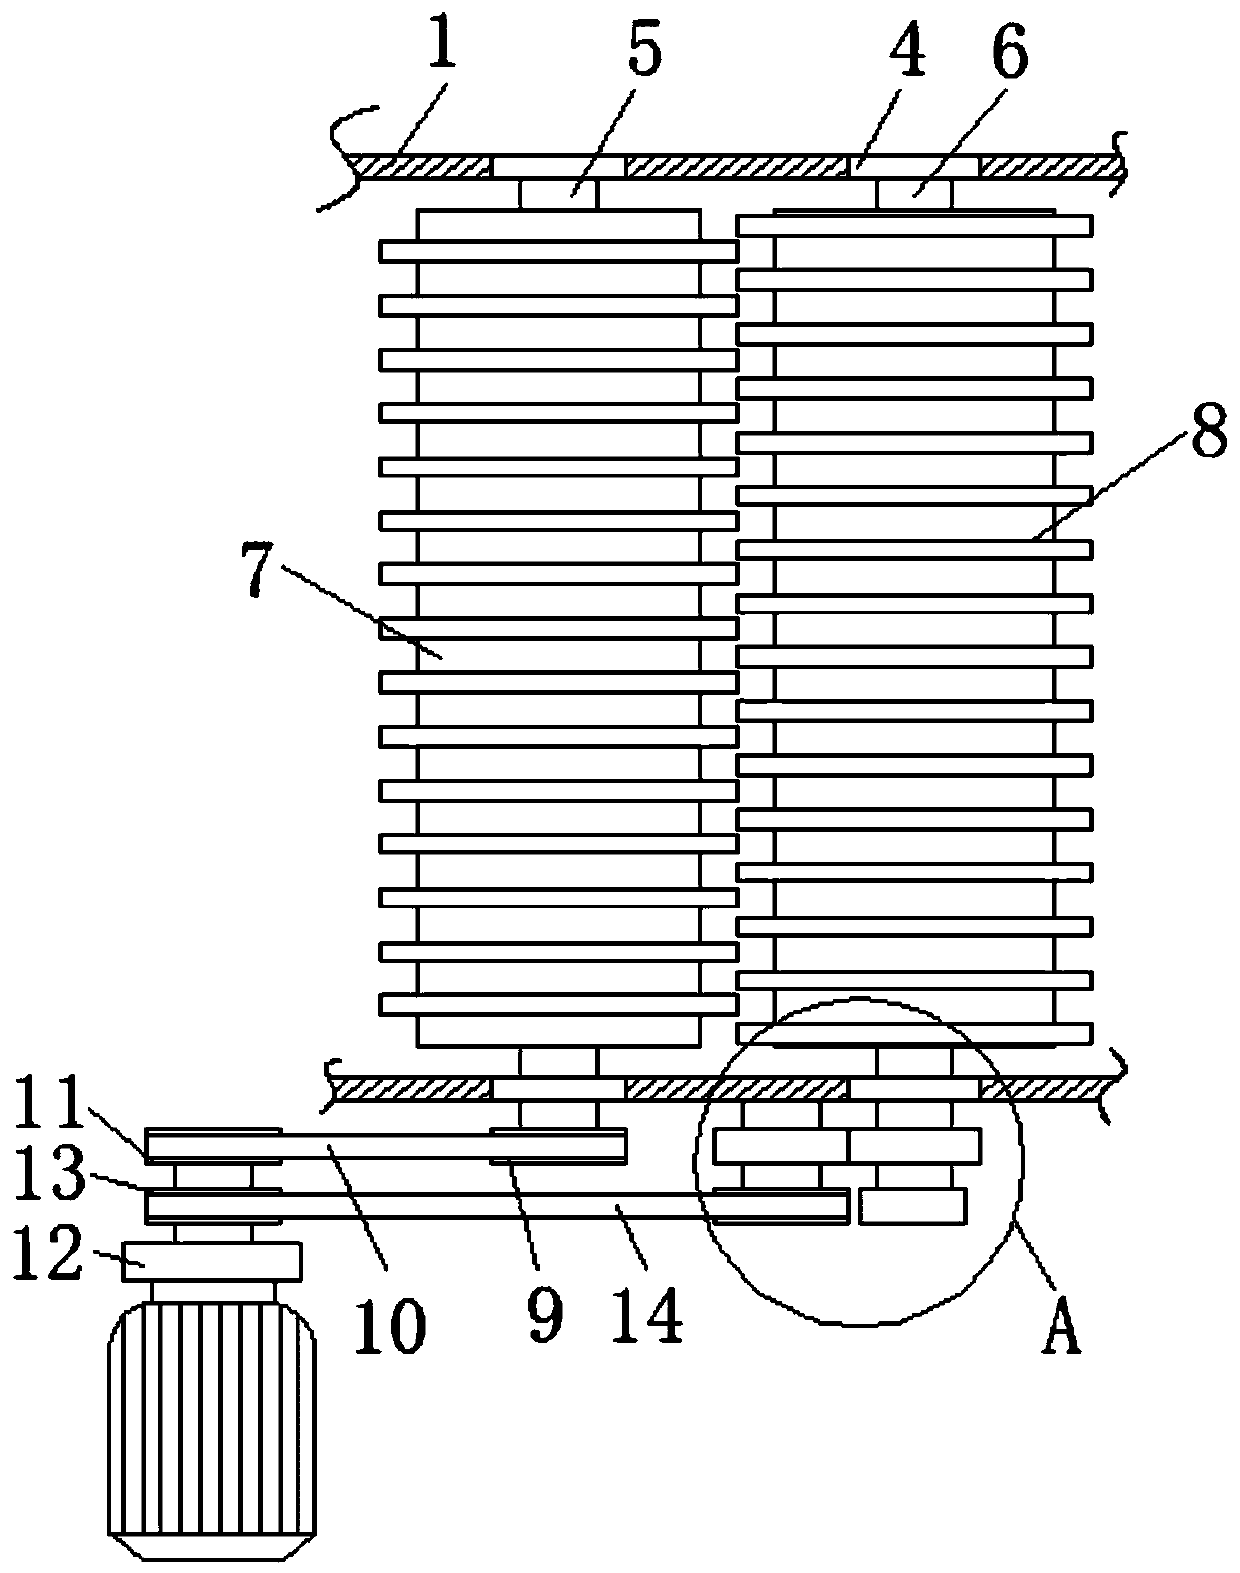 Waste plastic crushing and compressing recovery device based on sprocket driving principle